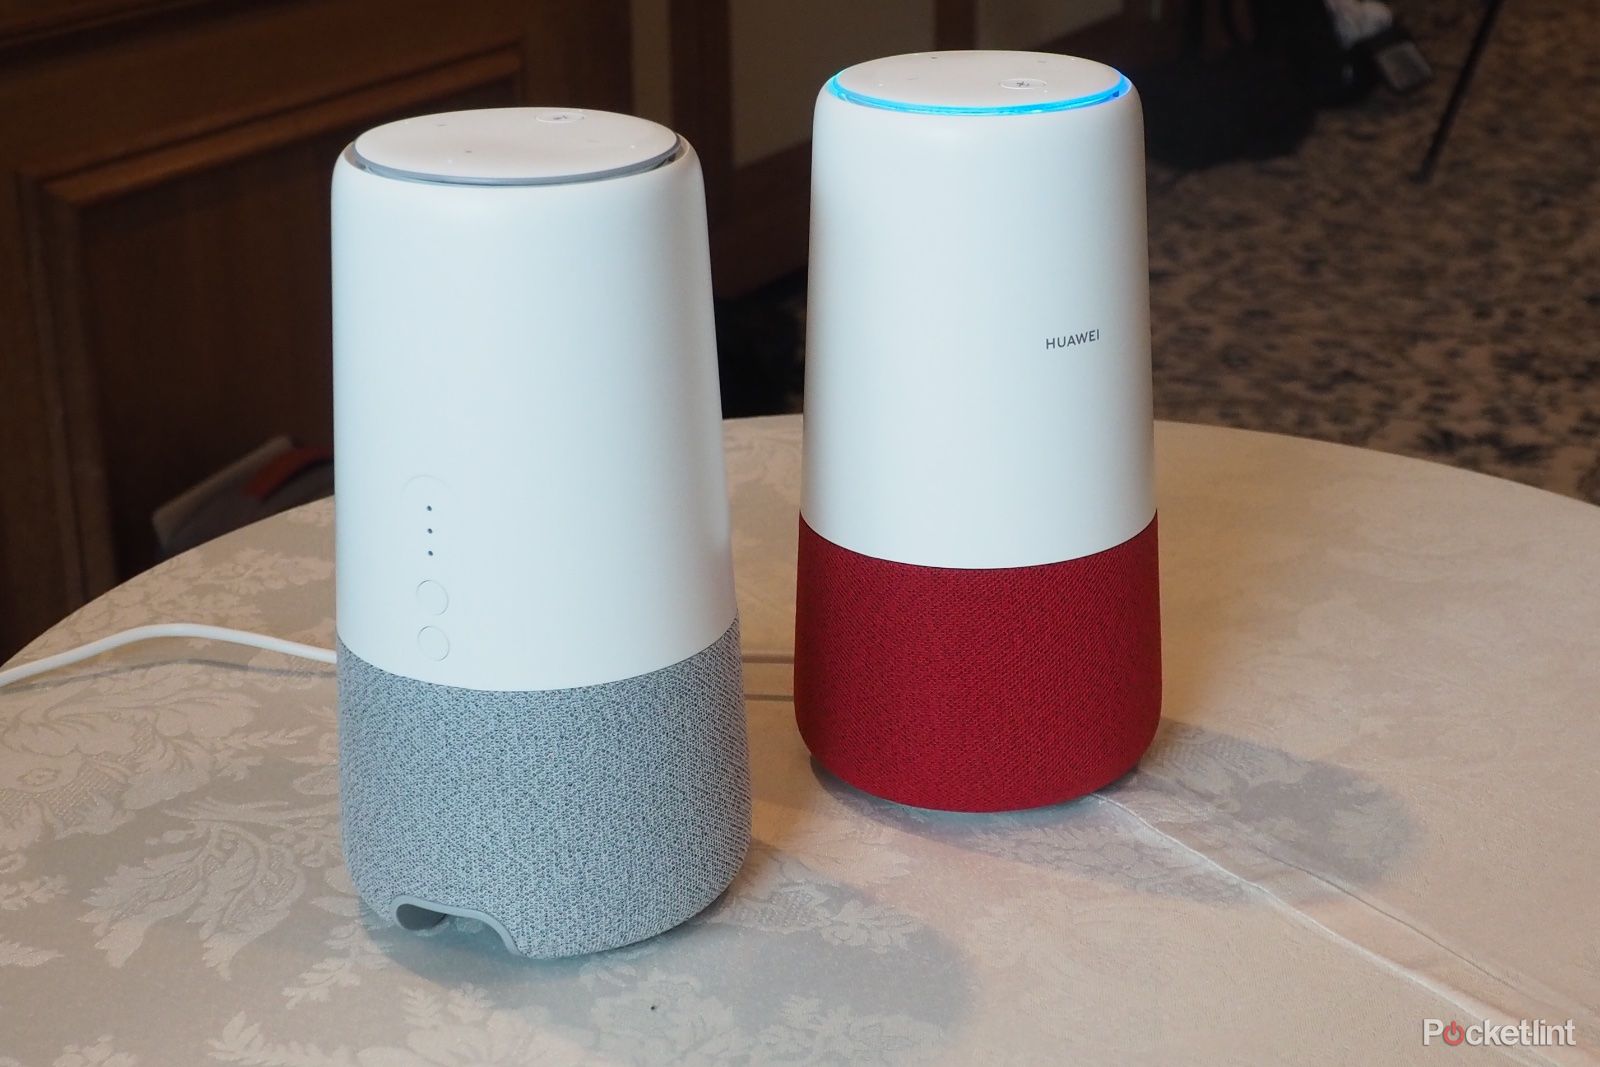 Huawei was working on a Google Assistant smart speaker before the US ban image 1